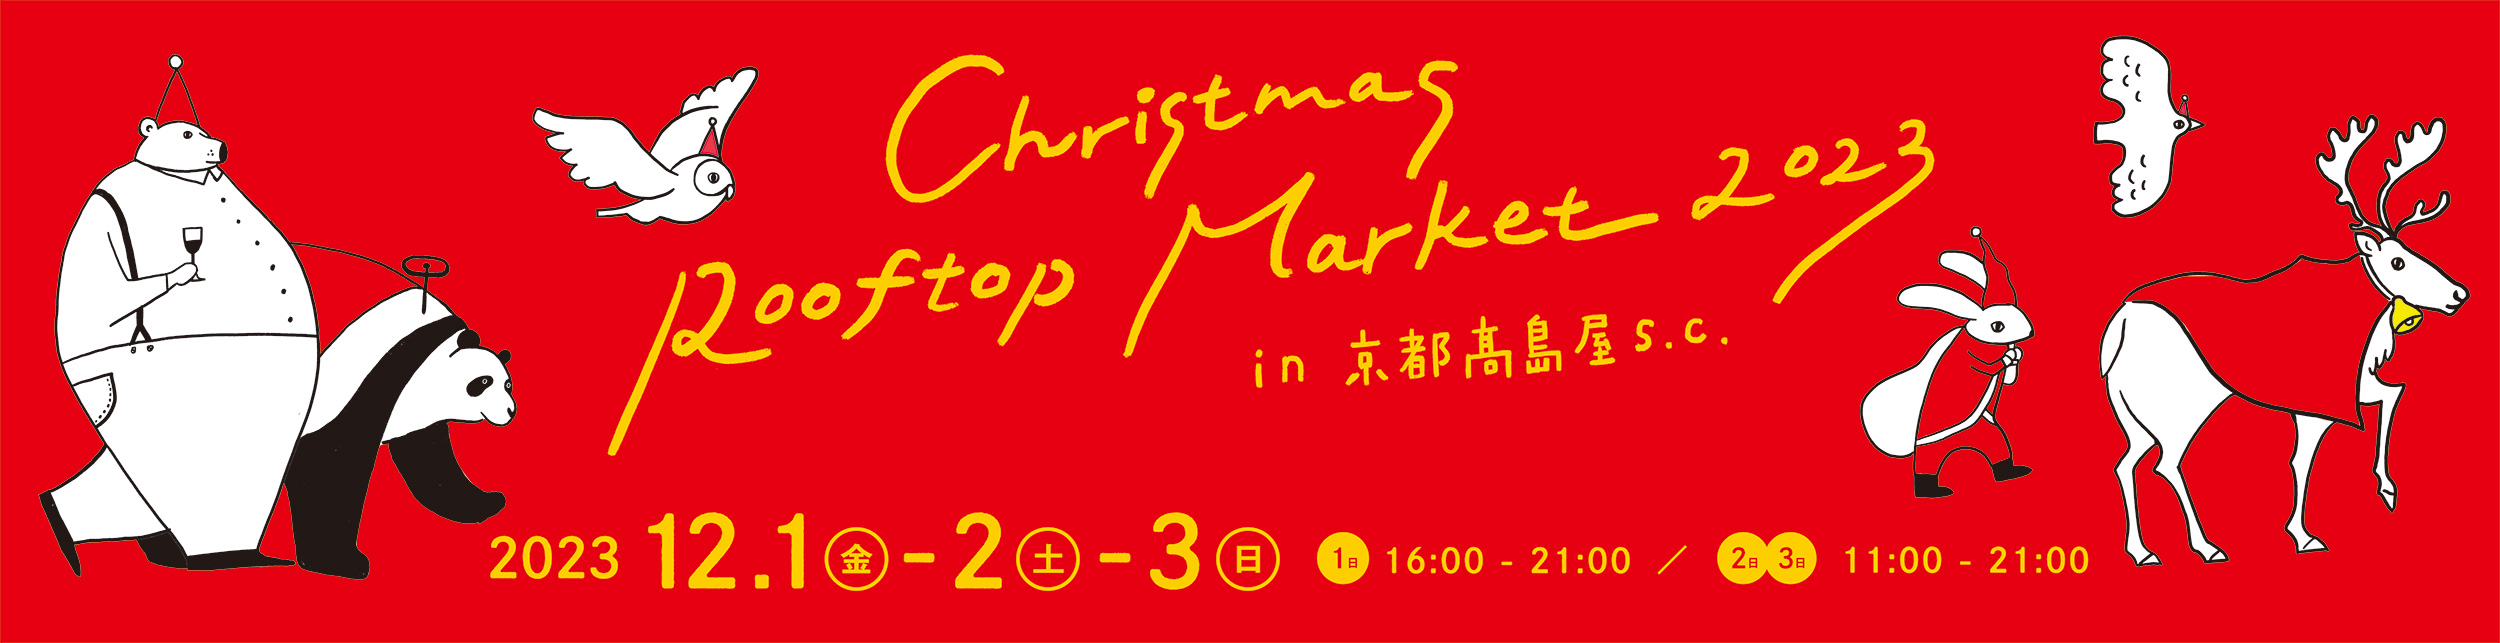 Christmas Rooftop Market 2023